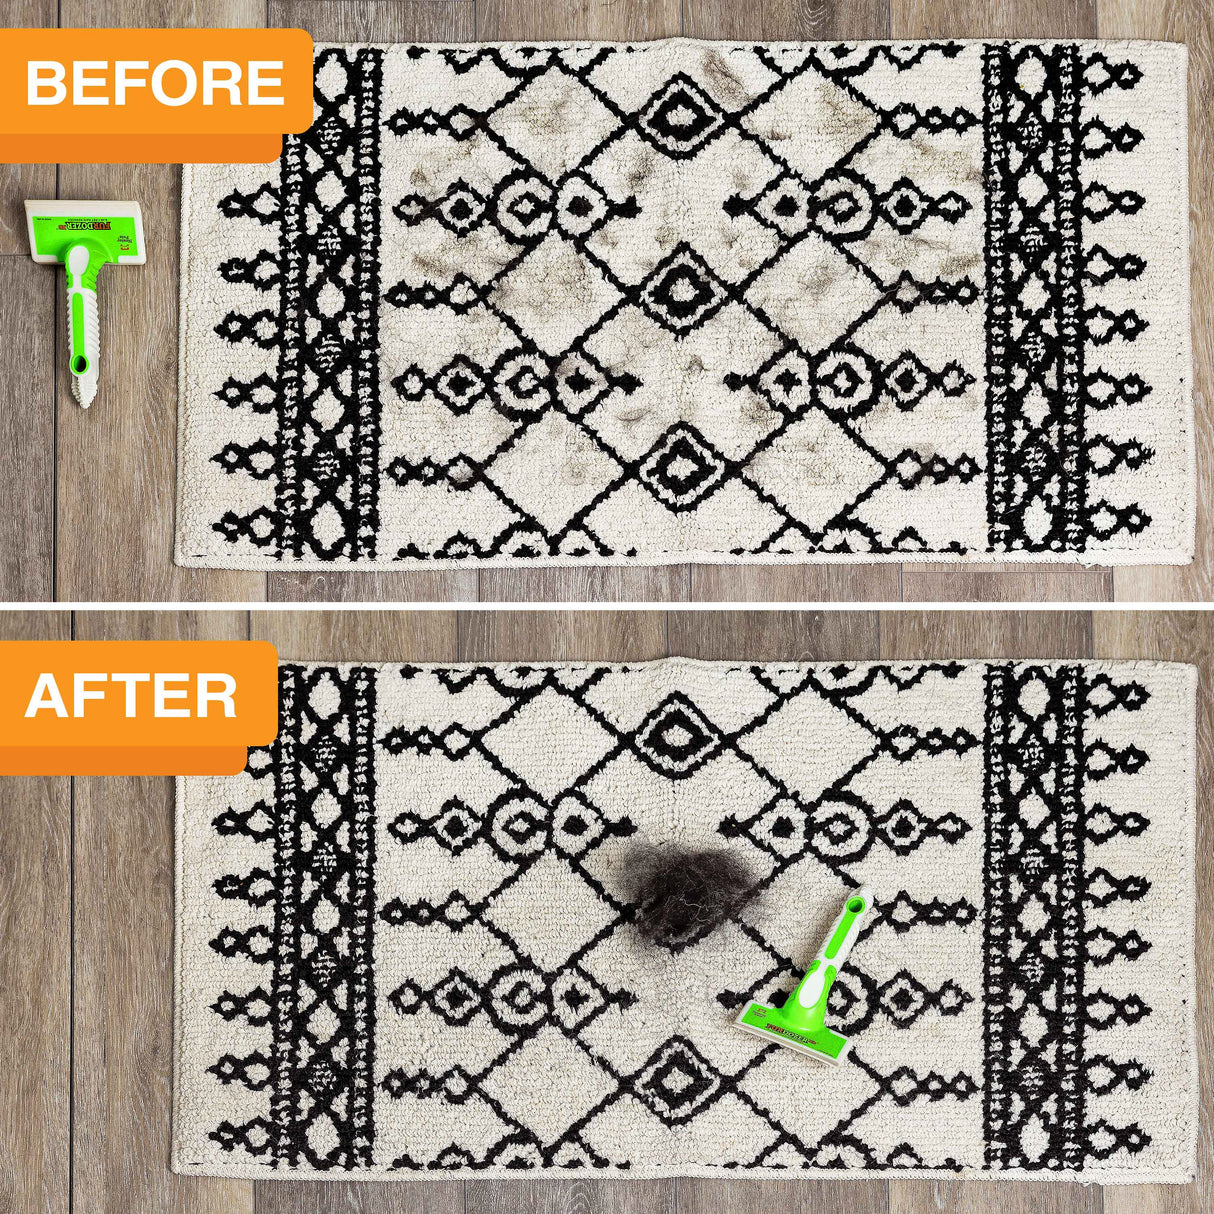 Black and white carpet before and after using the FurDozer